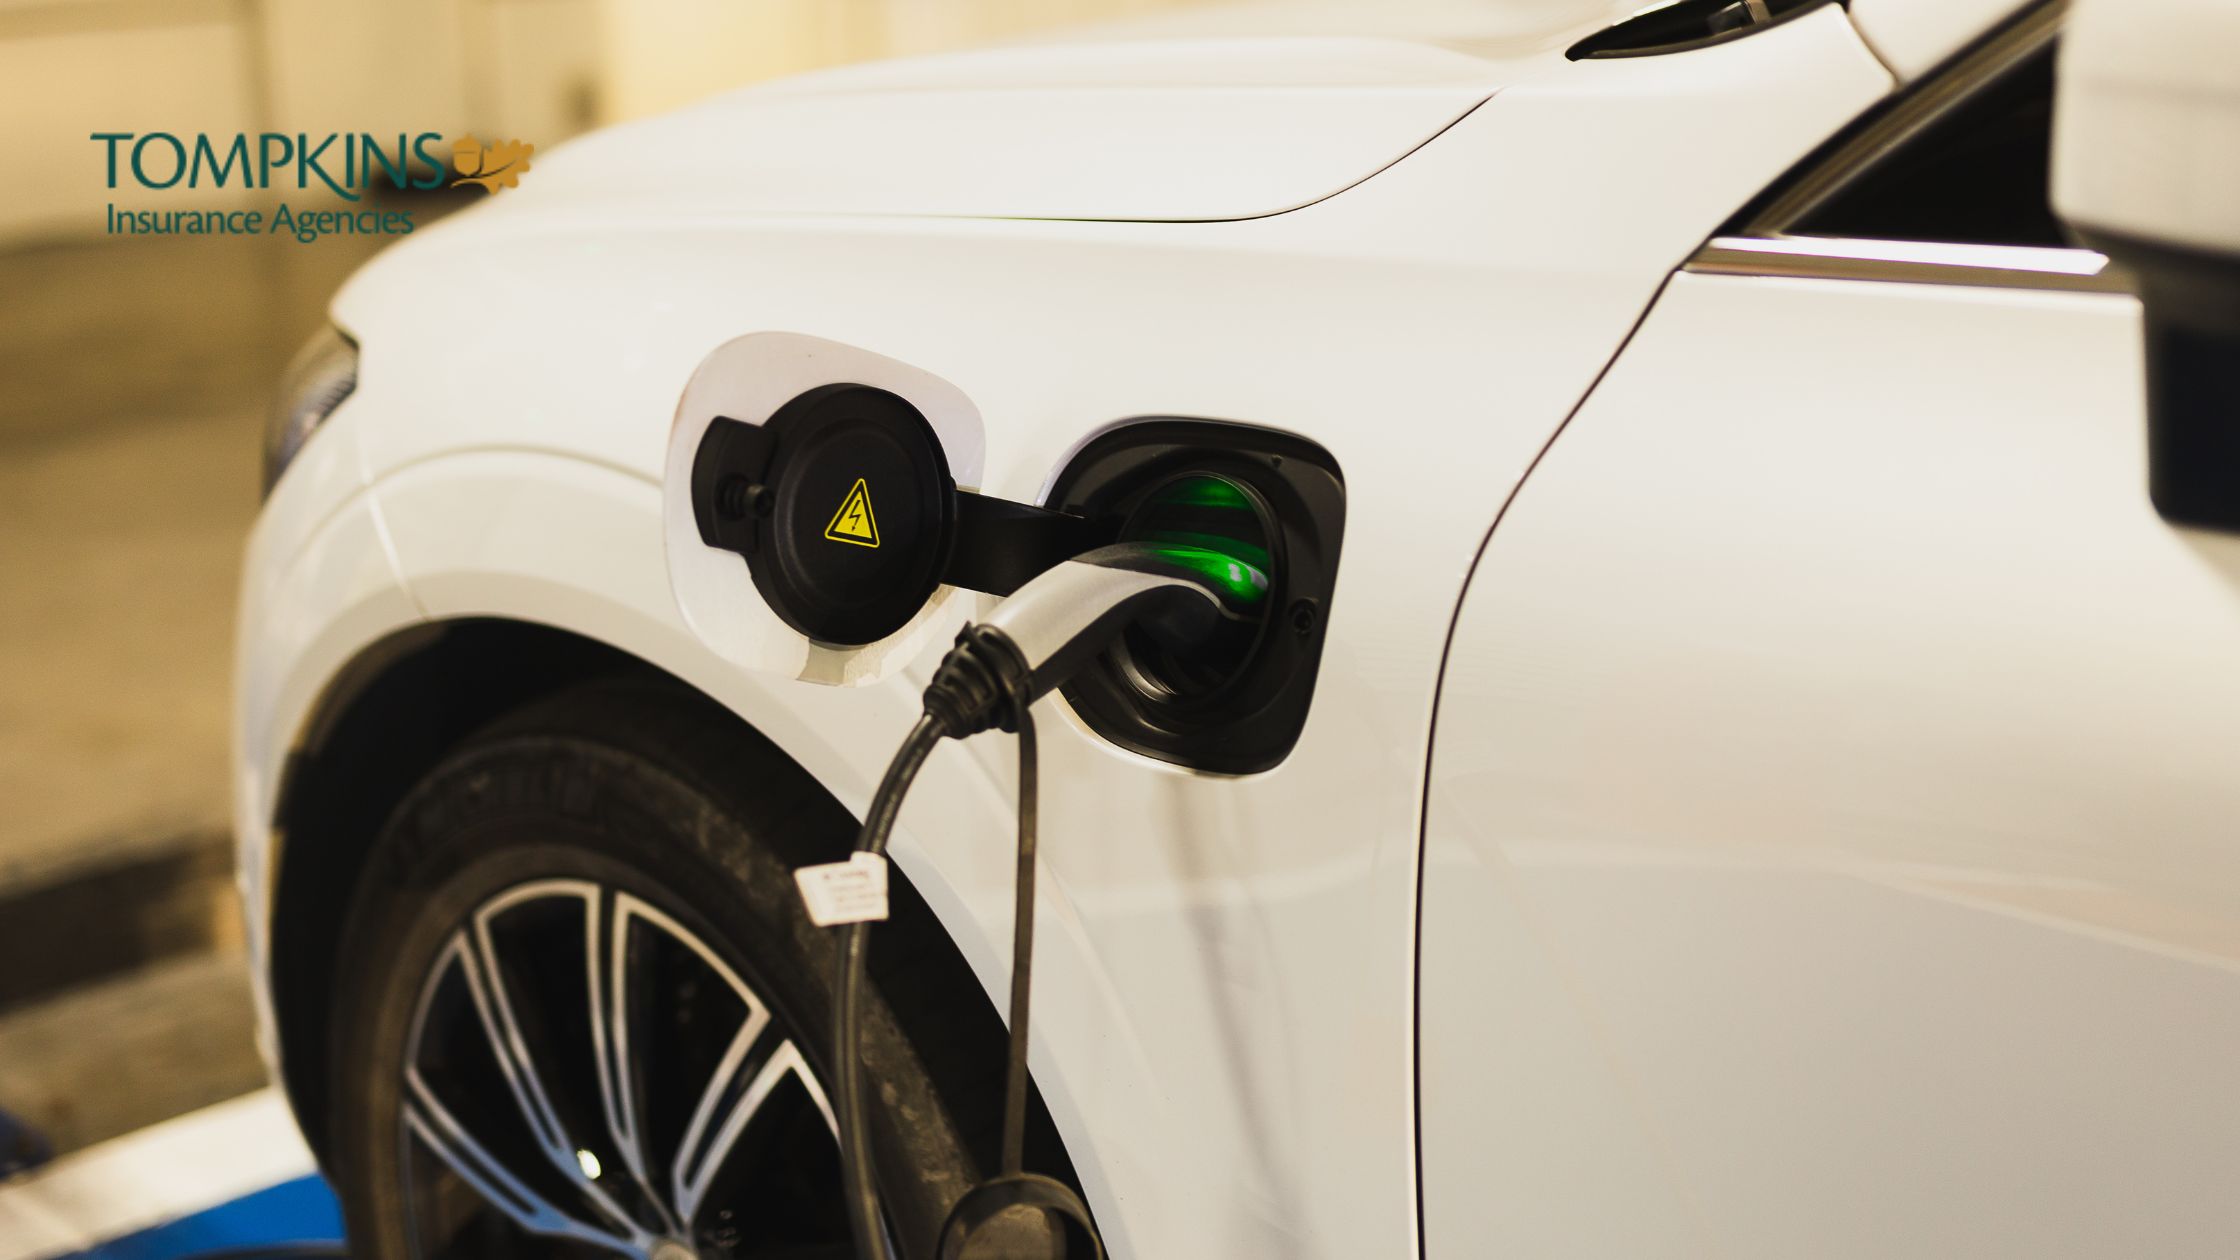 Electric Vehicles & Insurance: What You Need to Know